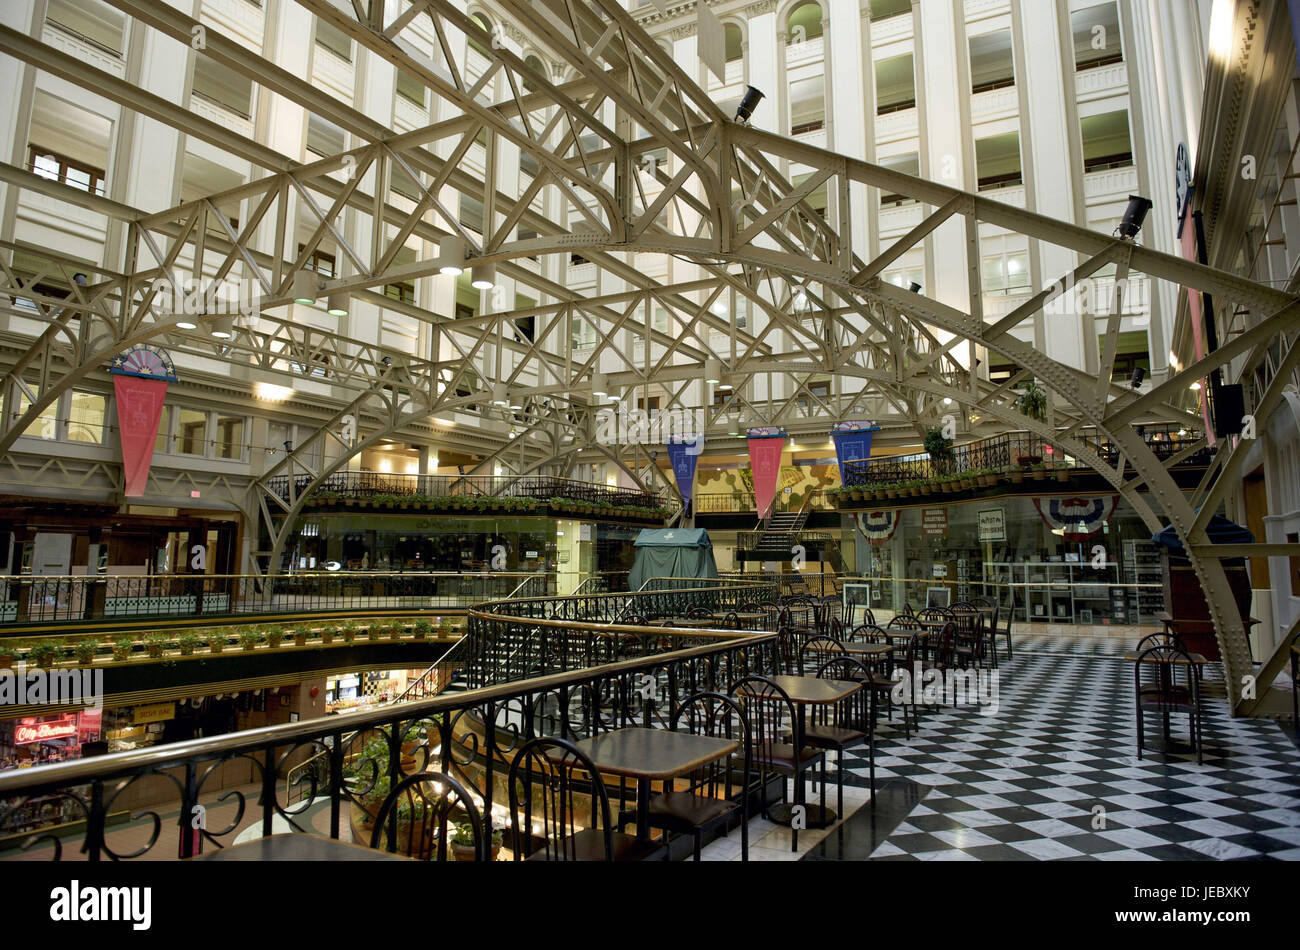 The USA, America, Washington D.C, shops in the interior of the old post-office building, Stock Photo